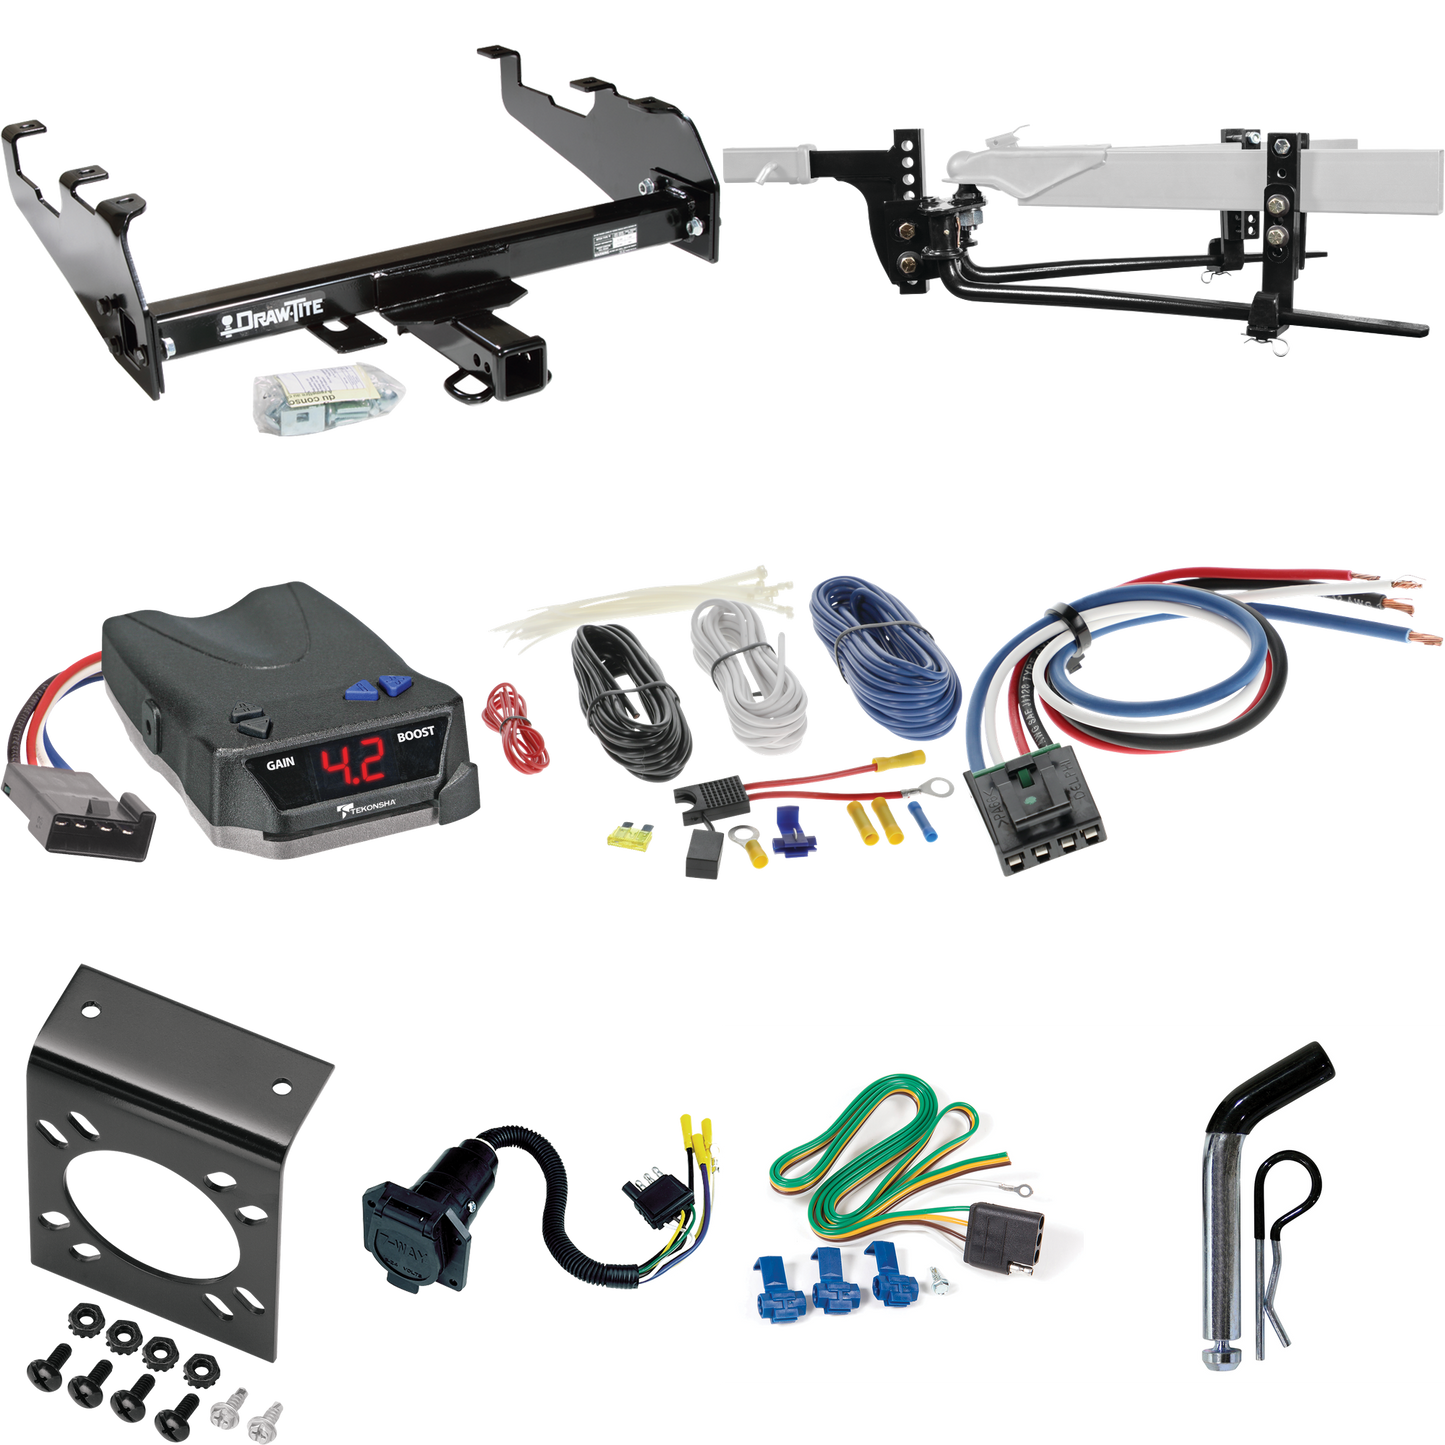 Fits 1963-1965 GMC 1000 Series Trailer Hitch Tow PKG w/ 11.5K Round Bar Weight Distribution Hitch w/ 2-5/16" Ball + Pin/Clip + Tekonsha BRAKE-EVN Brake Control + Generic BC Wiring Adapter + 7-Way RV Wiring (For w/Deep Drop Bumper Models) By Draw-Tite